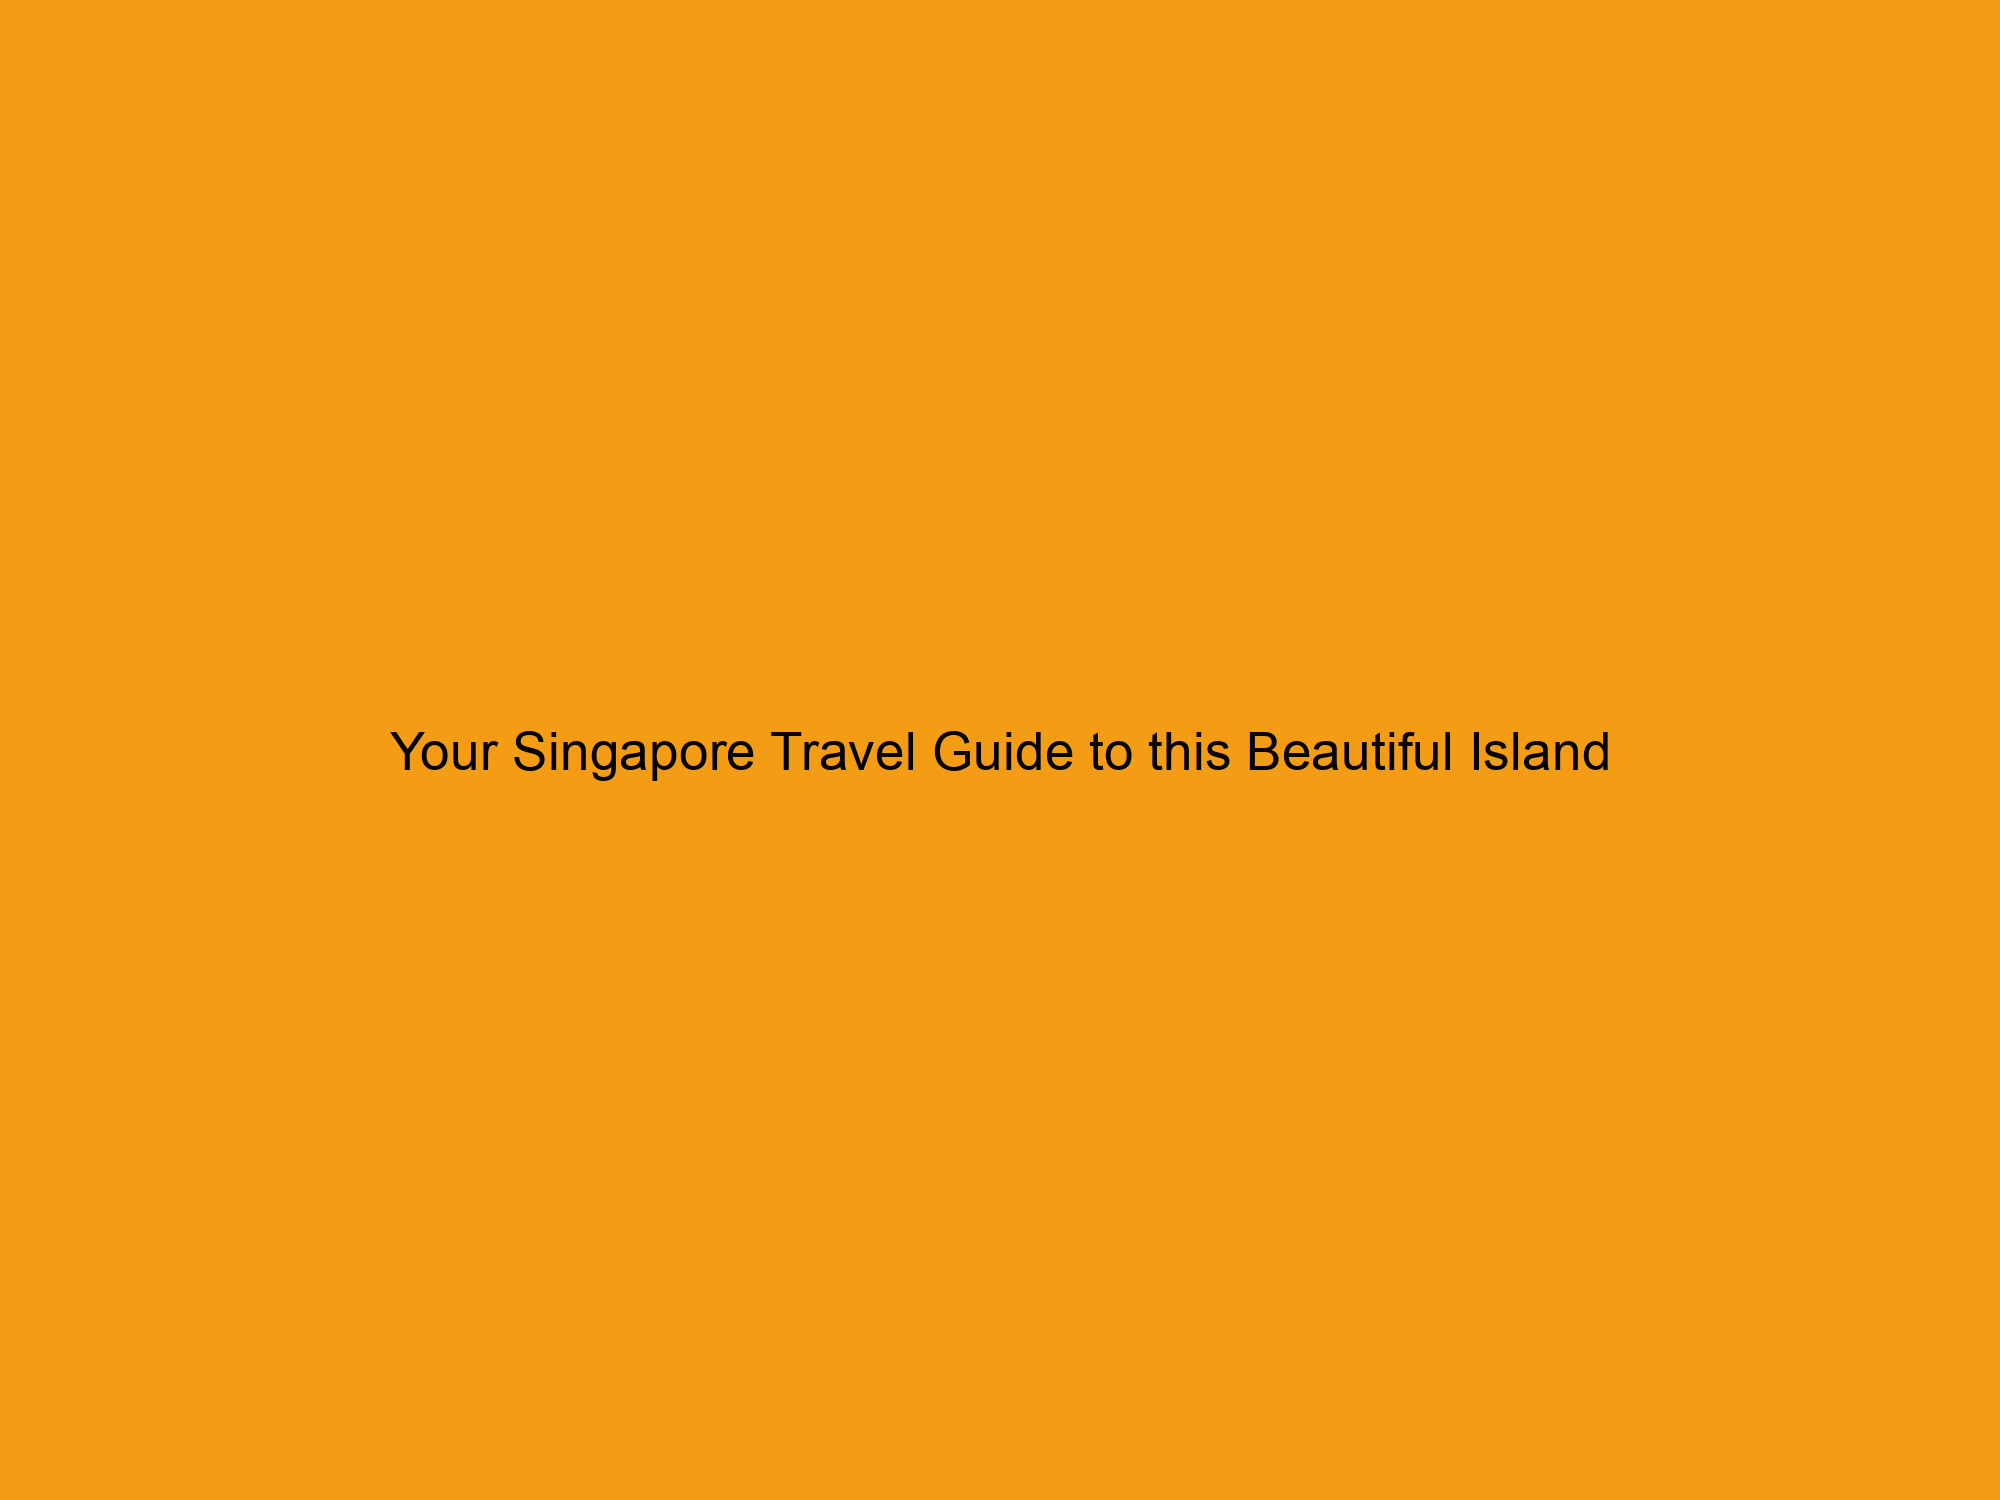 Your Singapore Travel Guide to this Beautiful Island